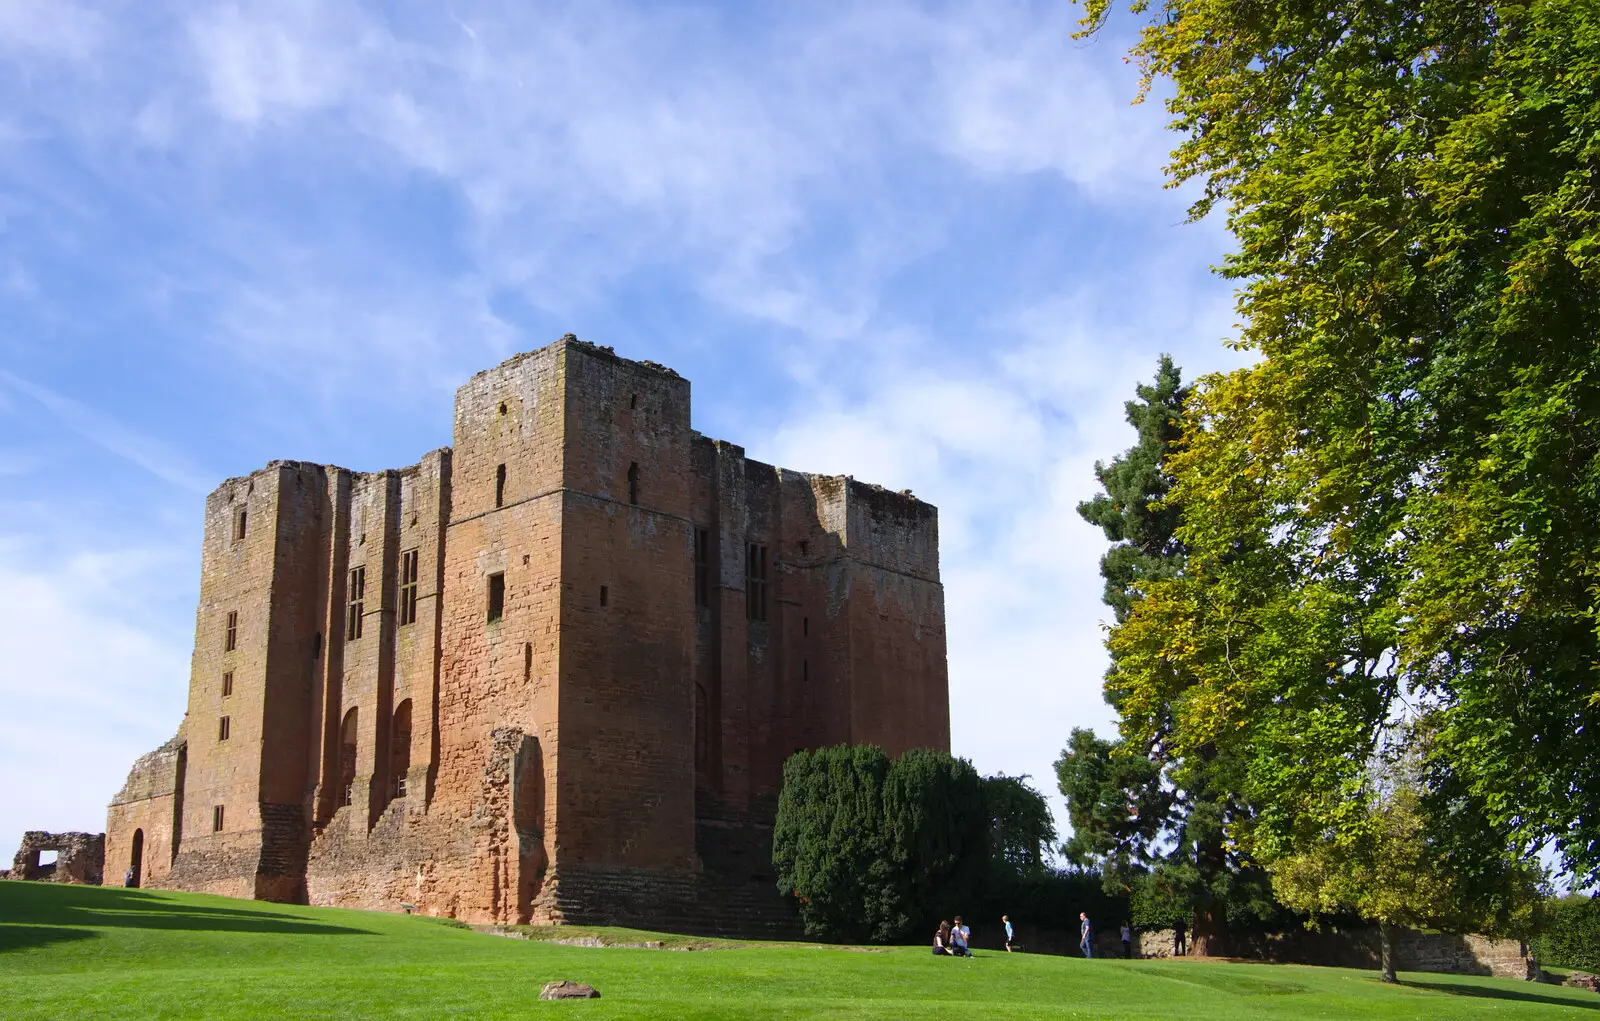 The original castle keep, from Kenilworth Castle and the 69th Entry Reunion Dinner, Stratford, Warwickshire - 14th September 2019